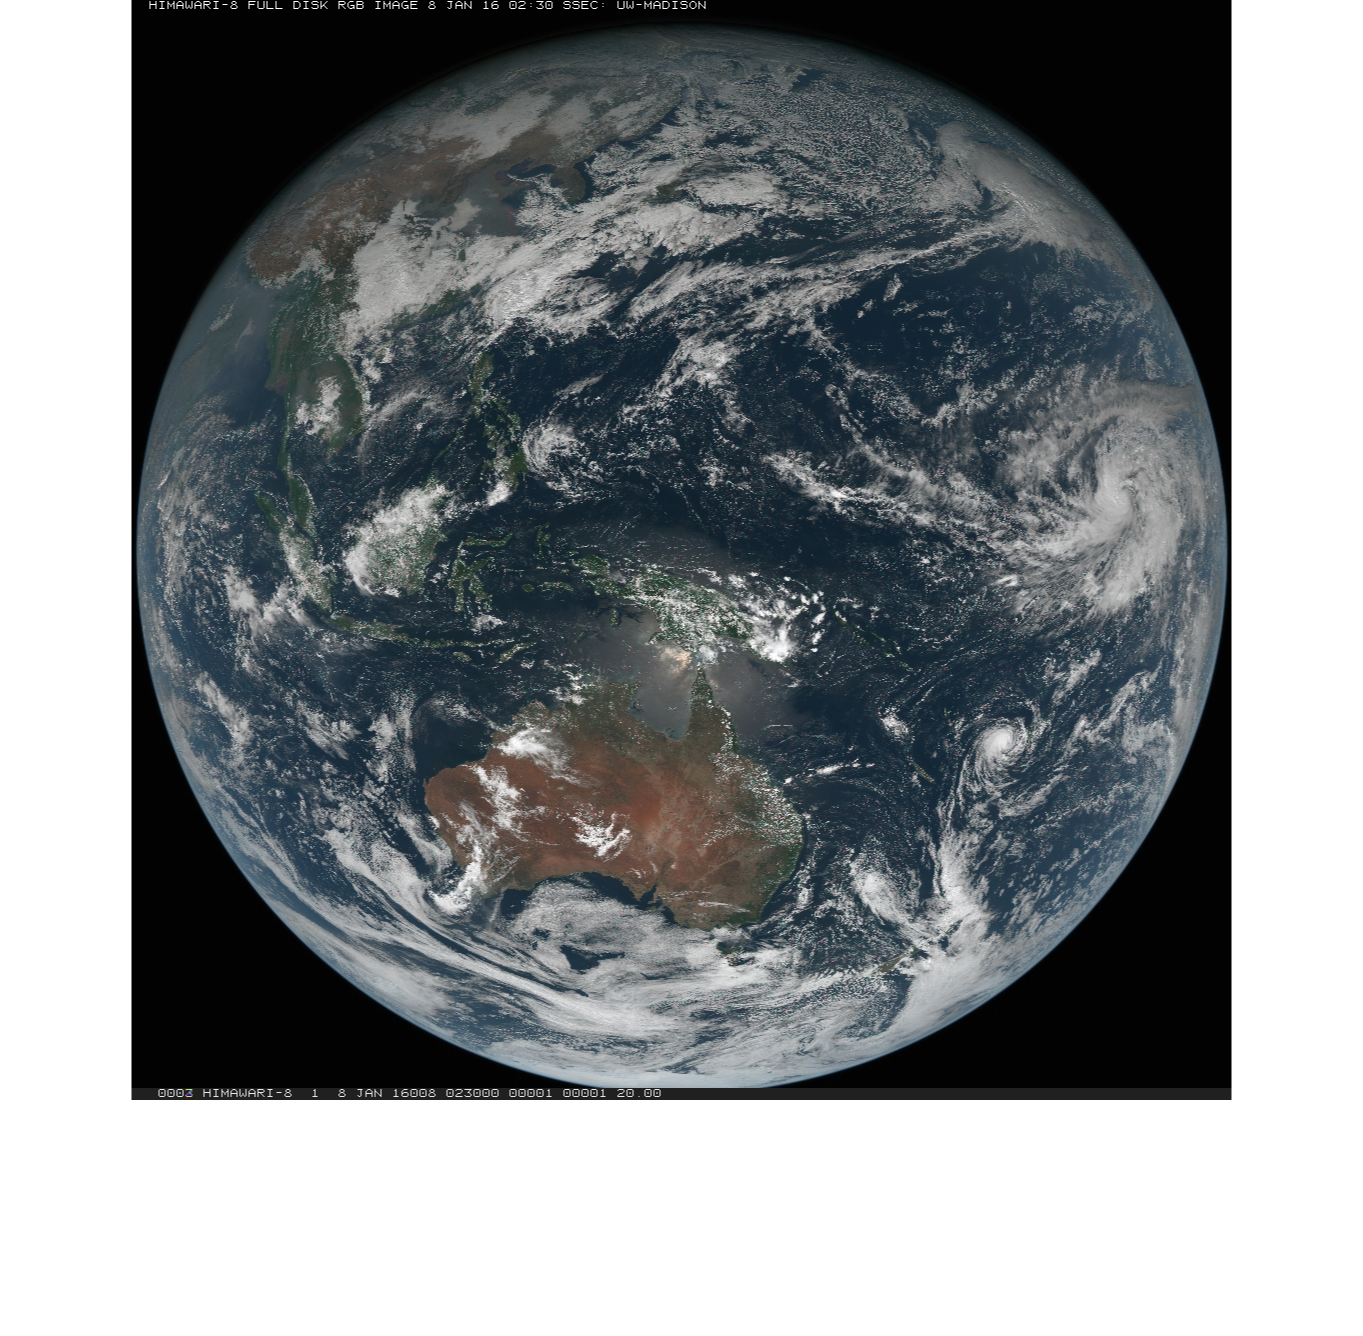 Himawari-8 True-Color Visible Imagery [click to enlarge], imagery Courtesy JMA